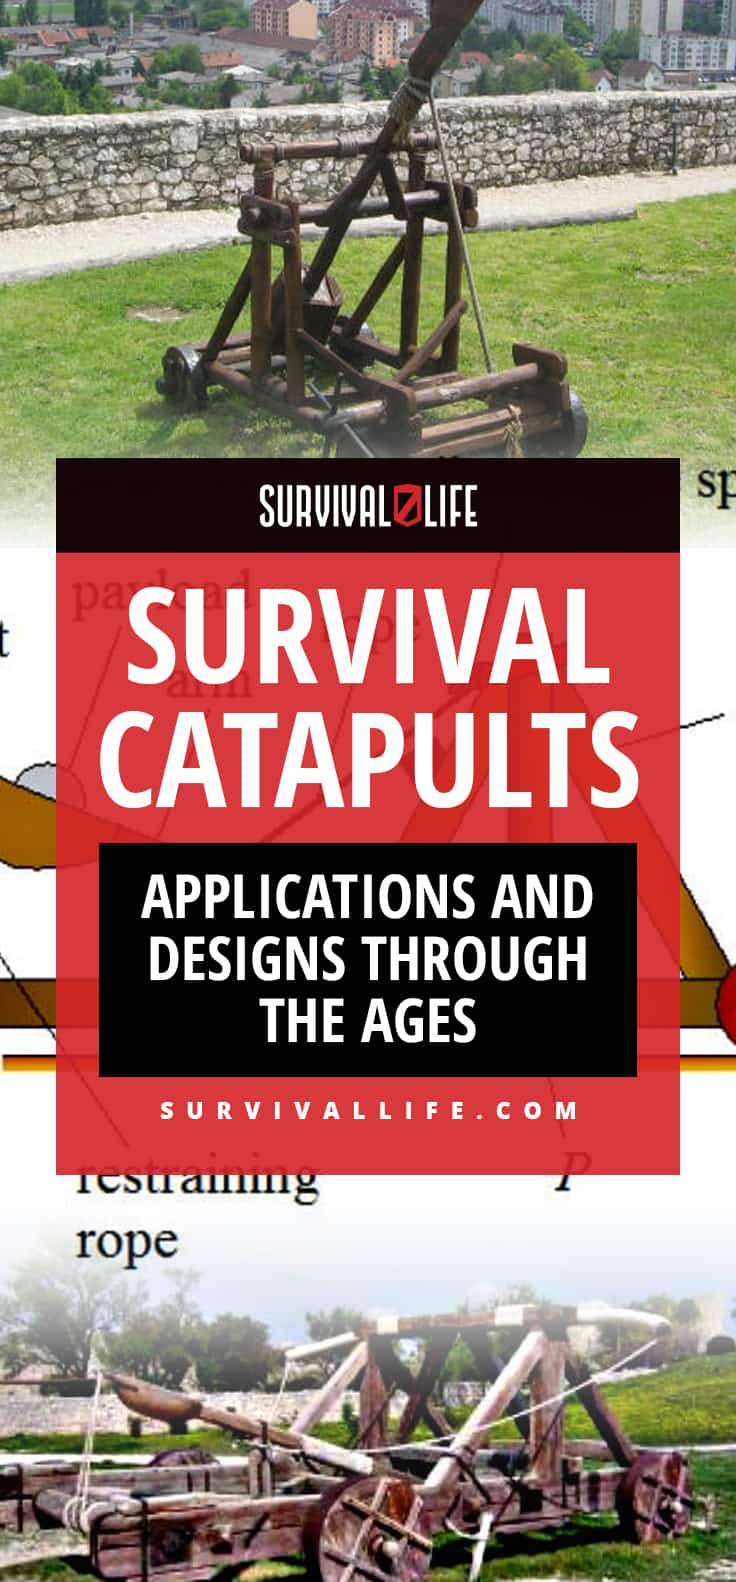 Survival Catapults | Applications and Designs Through The Ages